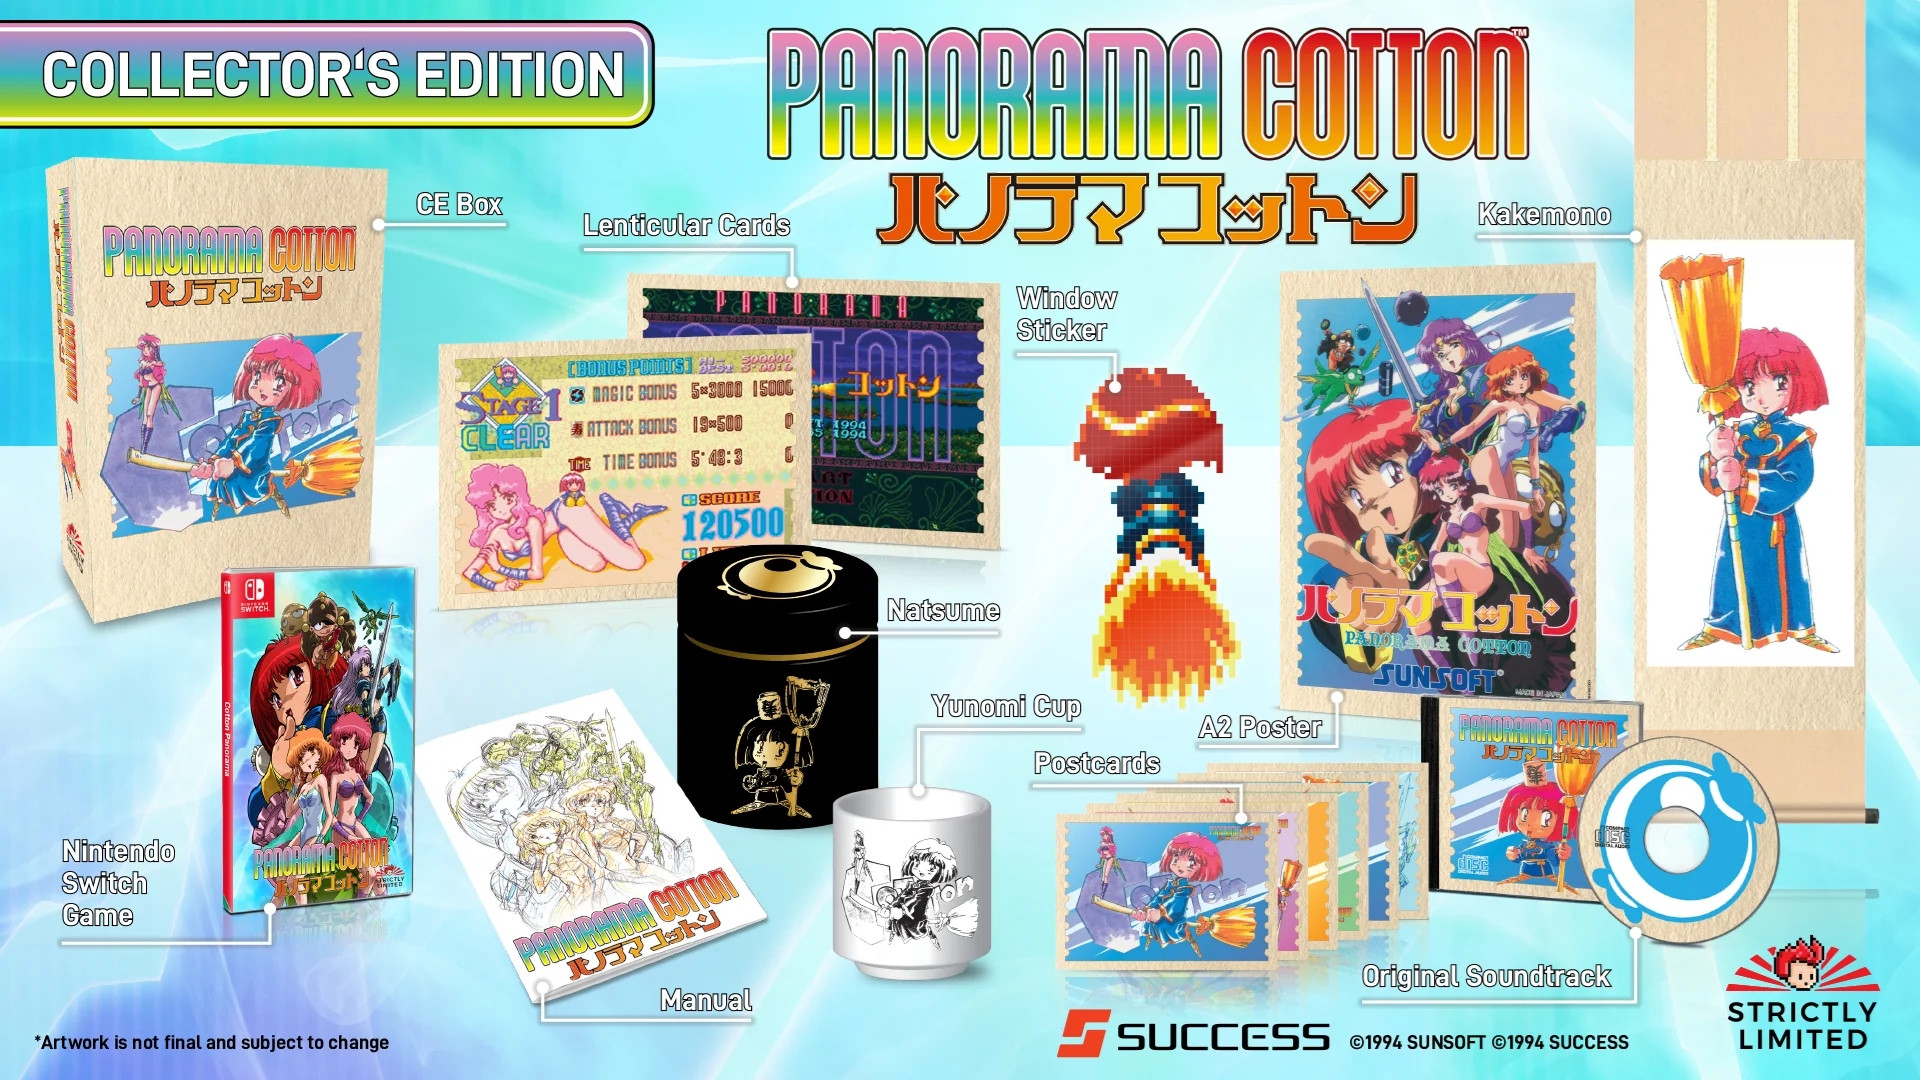 Panorama Cotton Collector's Edition - Nintendo Switch